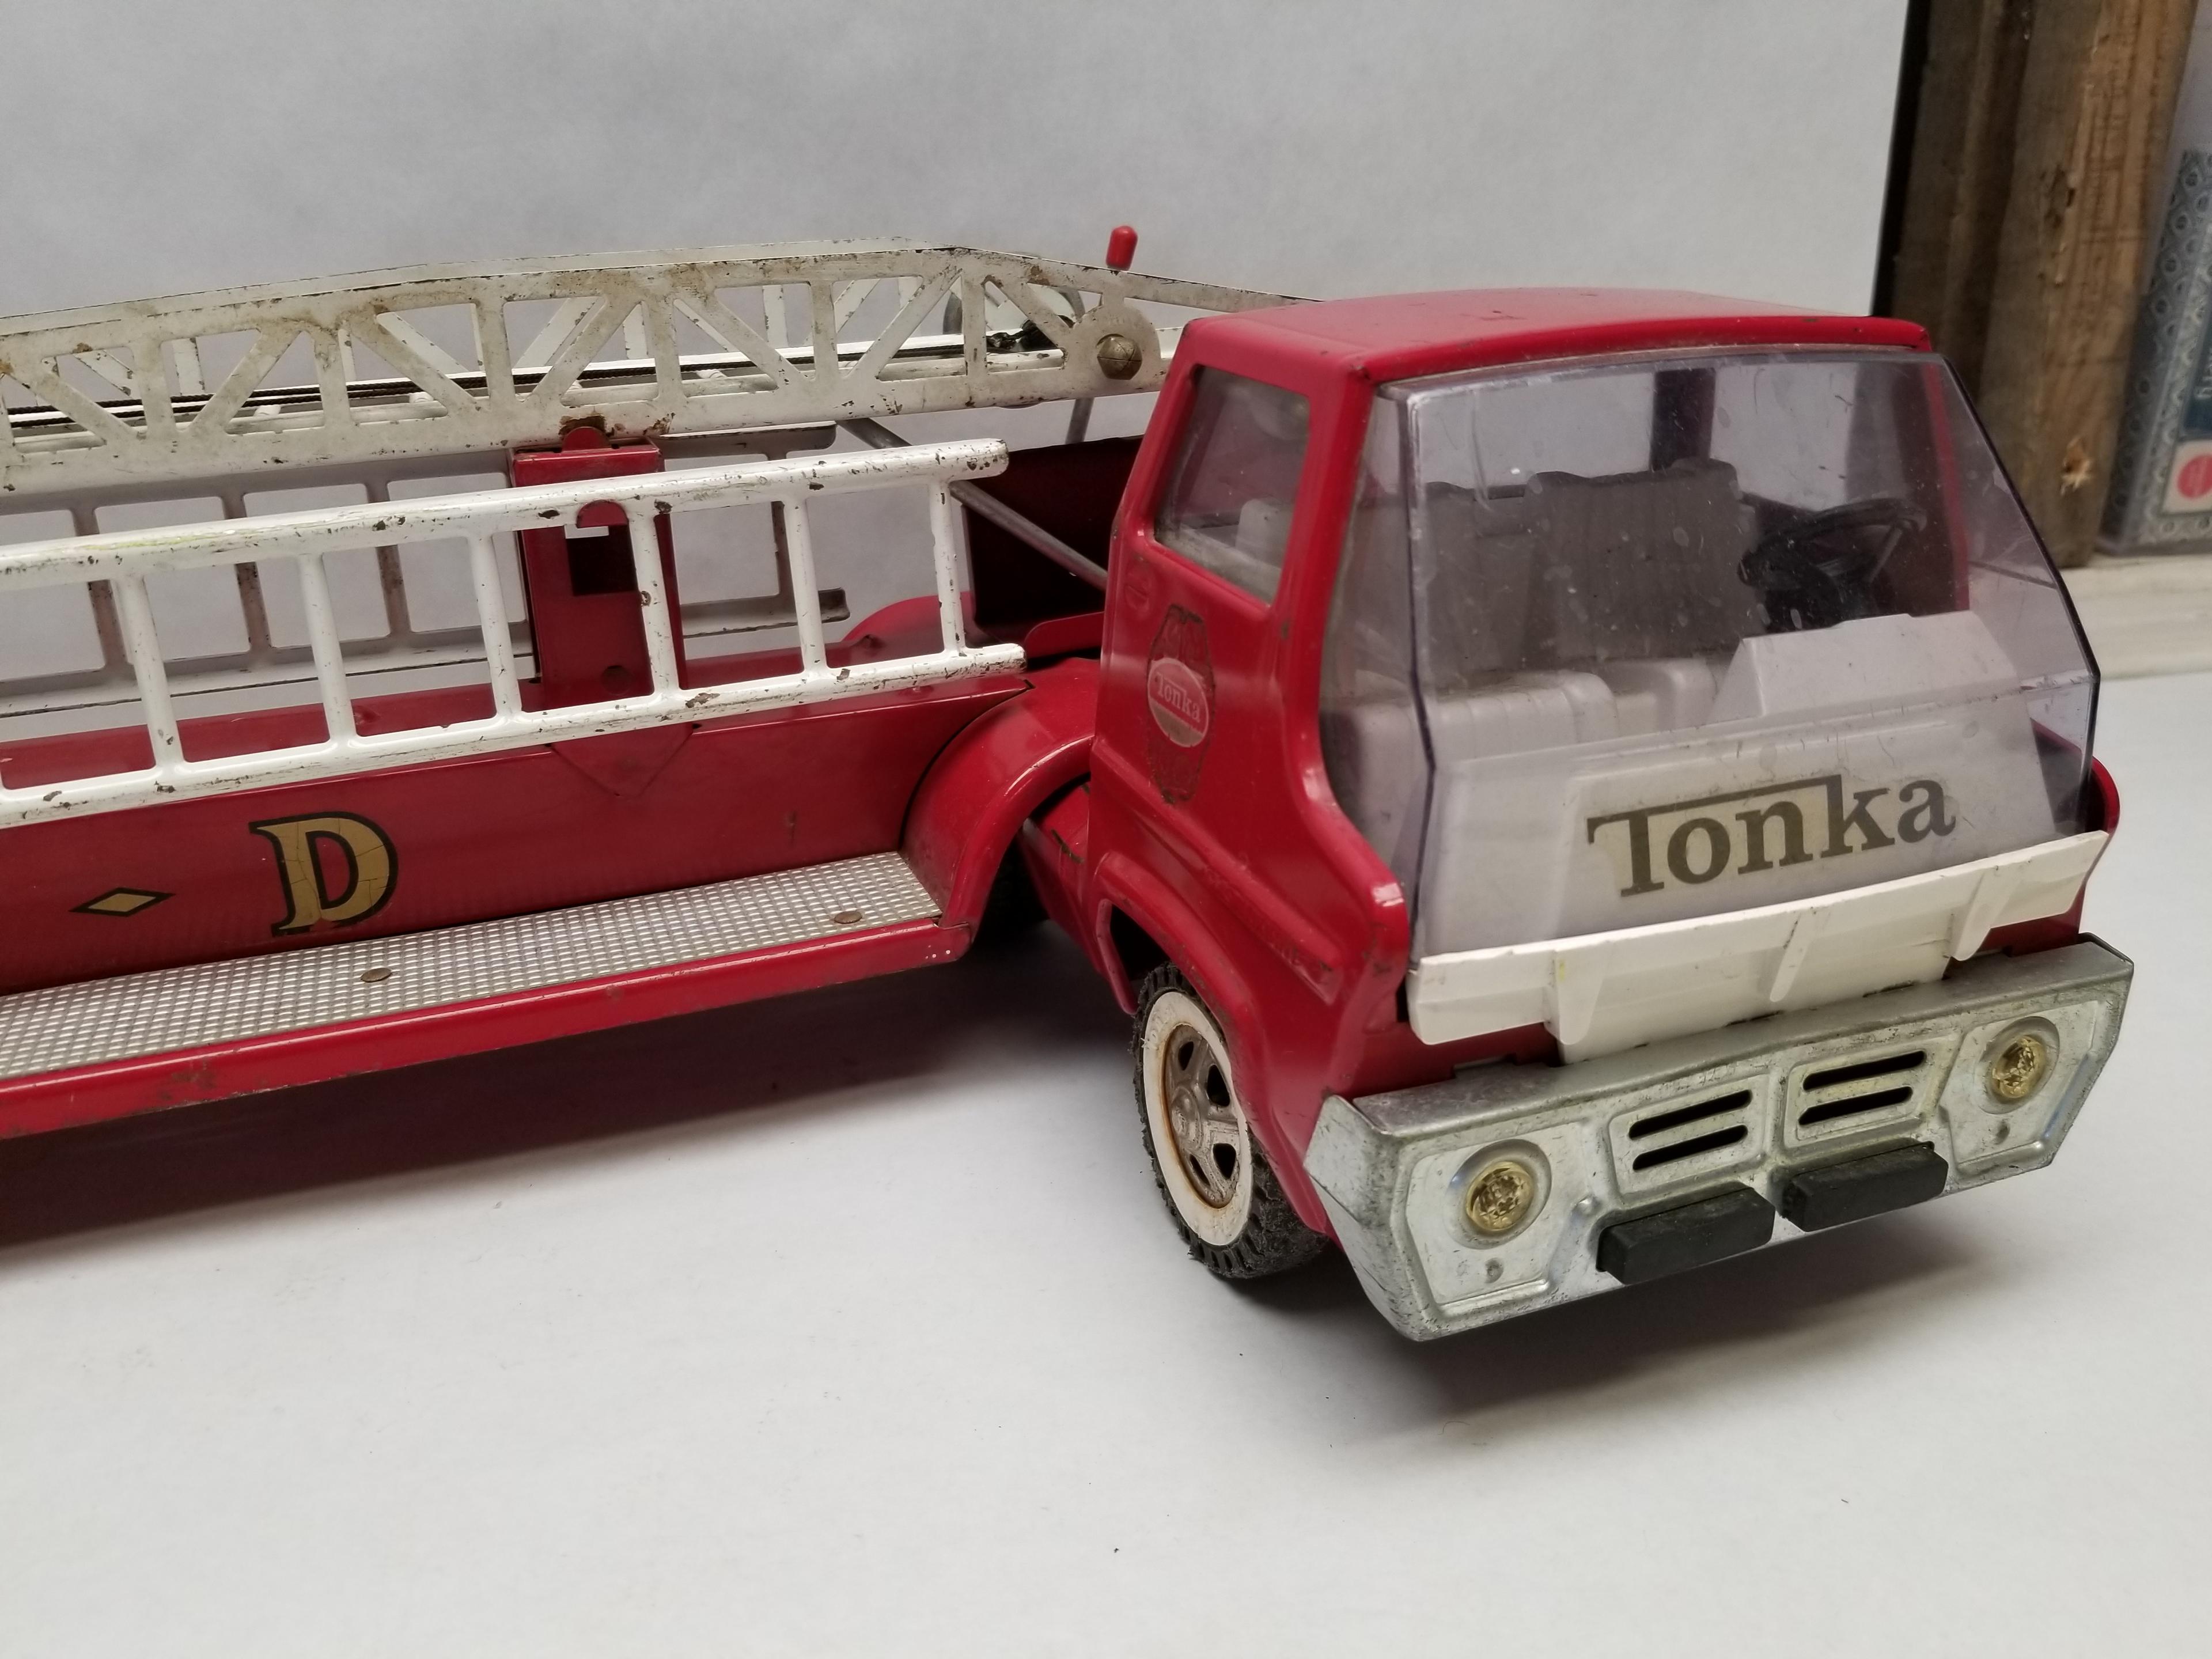 Vintage Tonka T-F-D Hook-and-Ladder Fire Truck